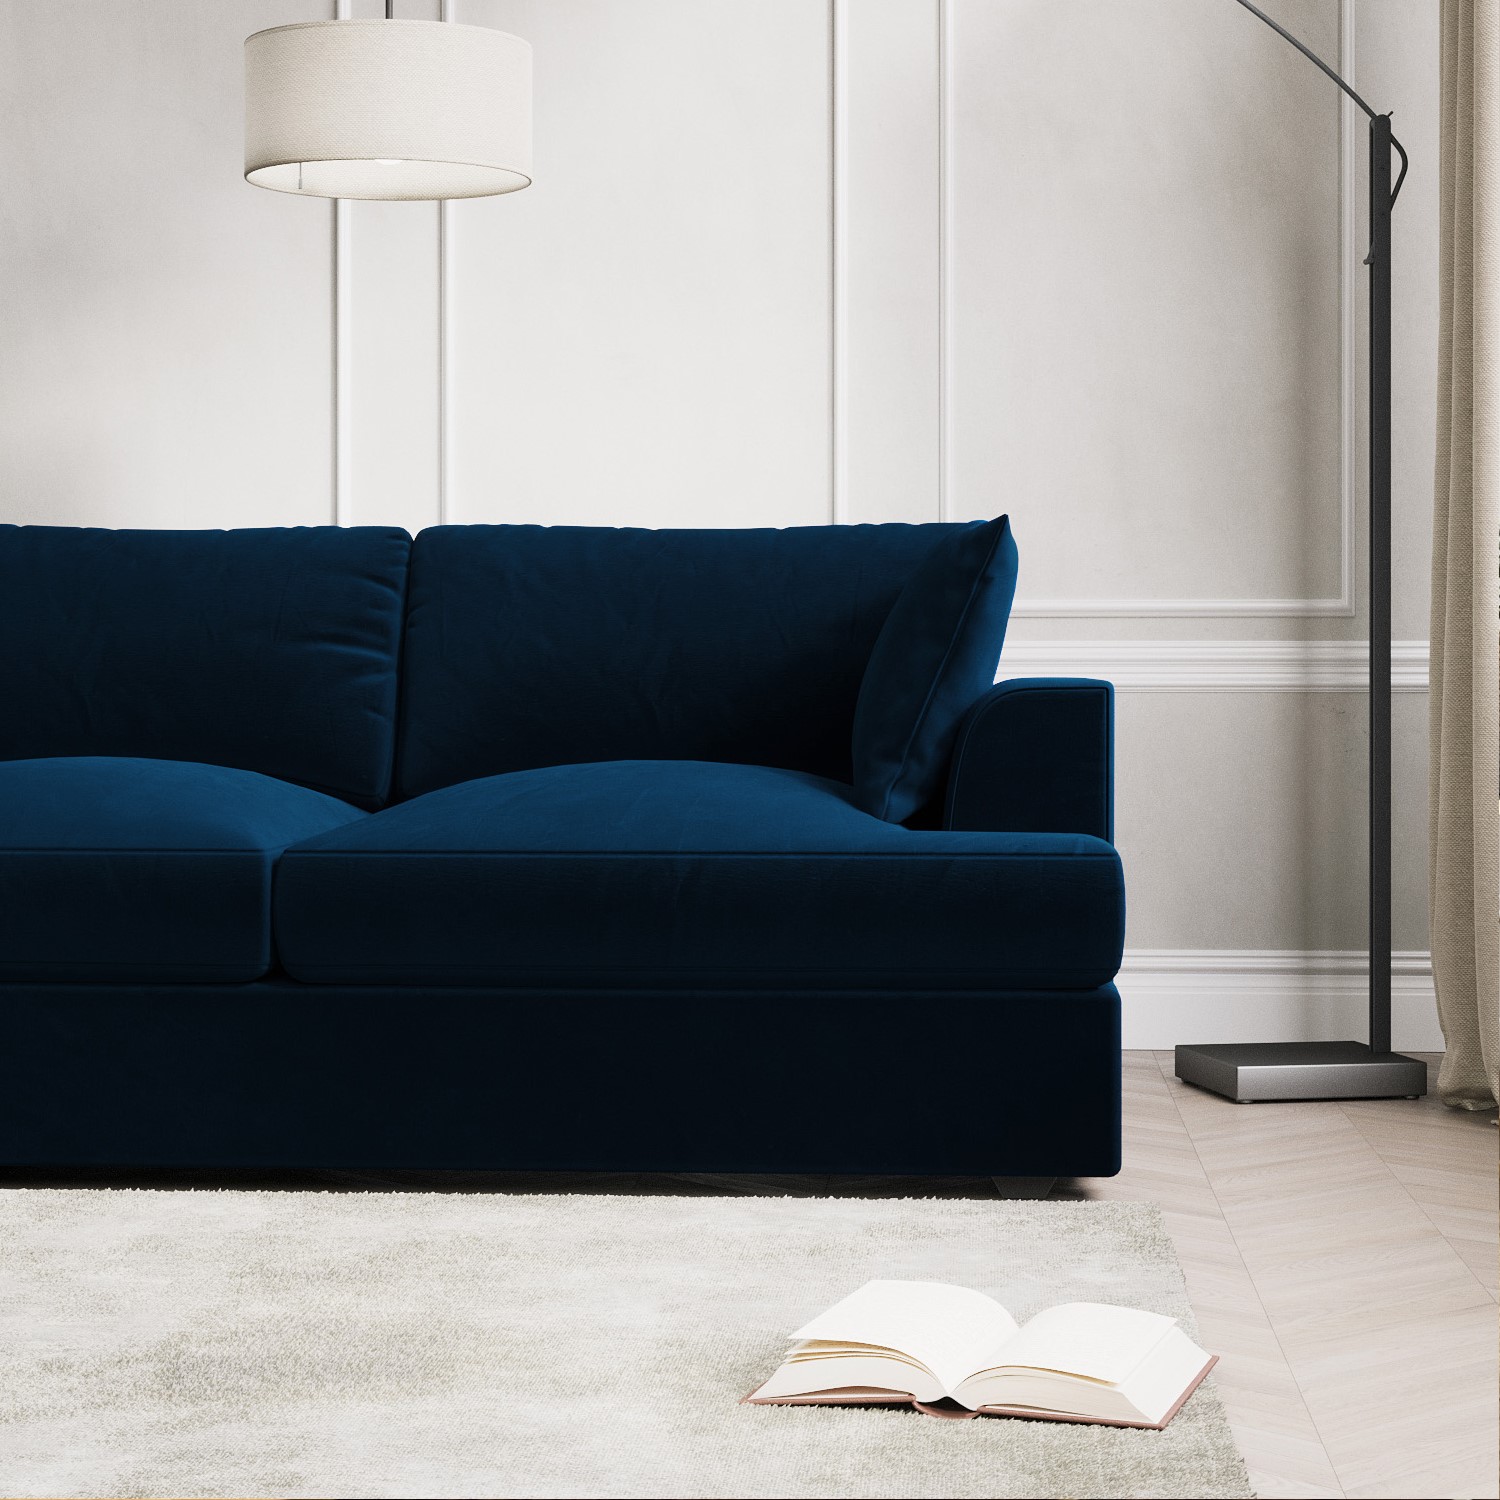 Read more about Navy velvet left hand l shaped sofa seats 4 august